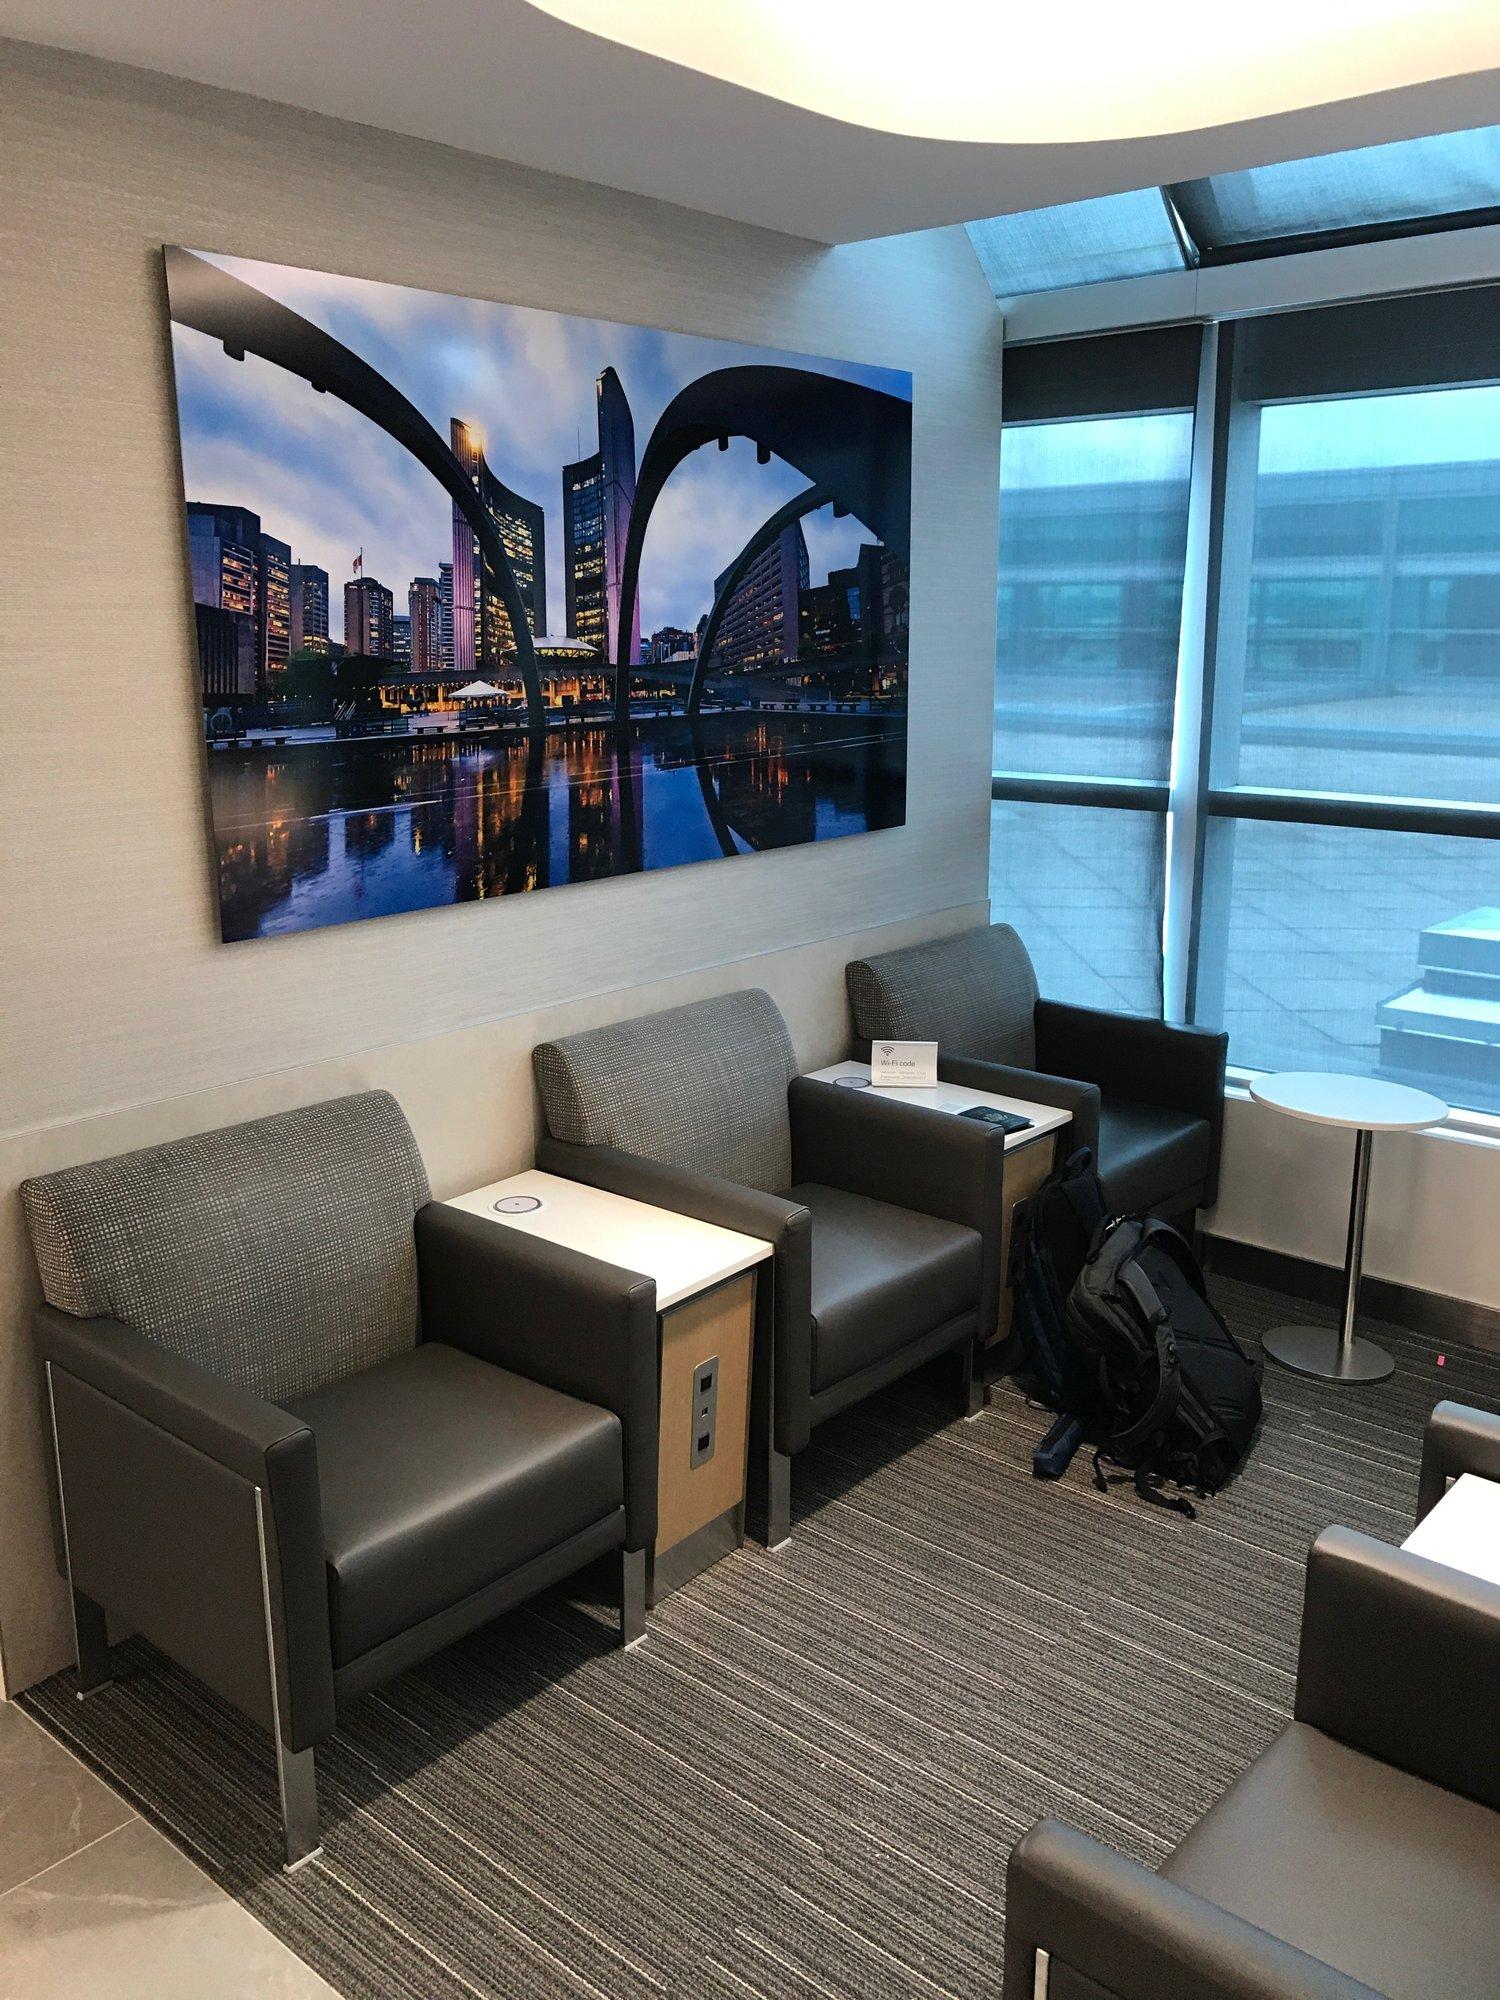 American Airlines Admirals Club image 1 of 9